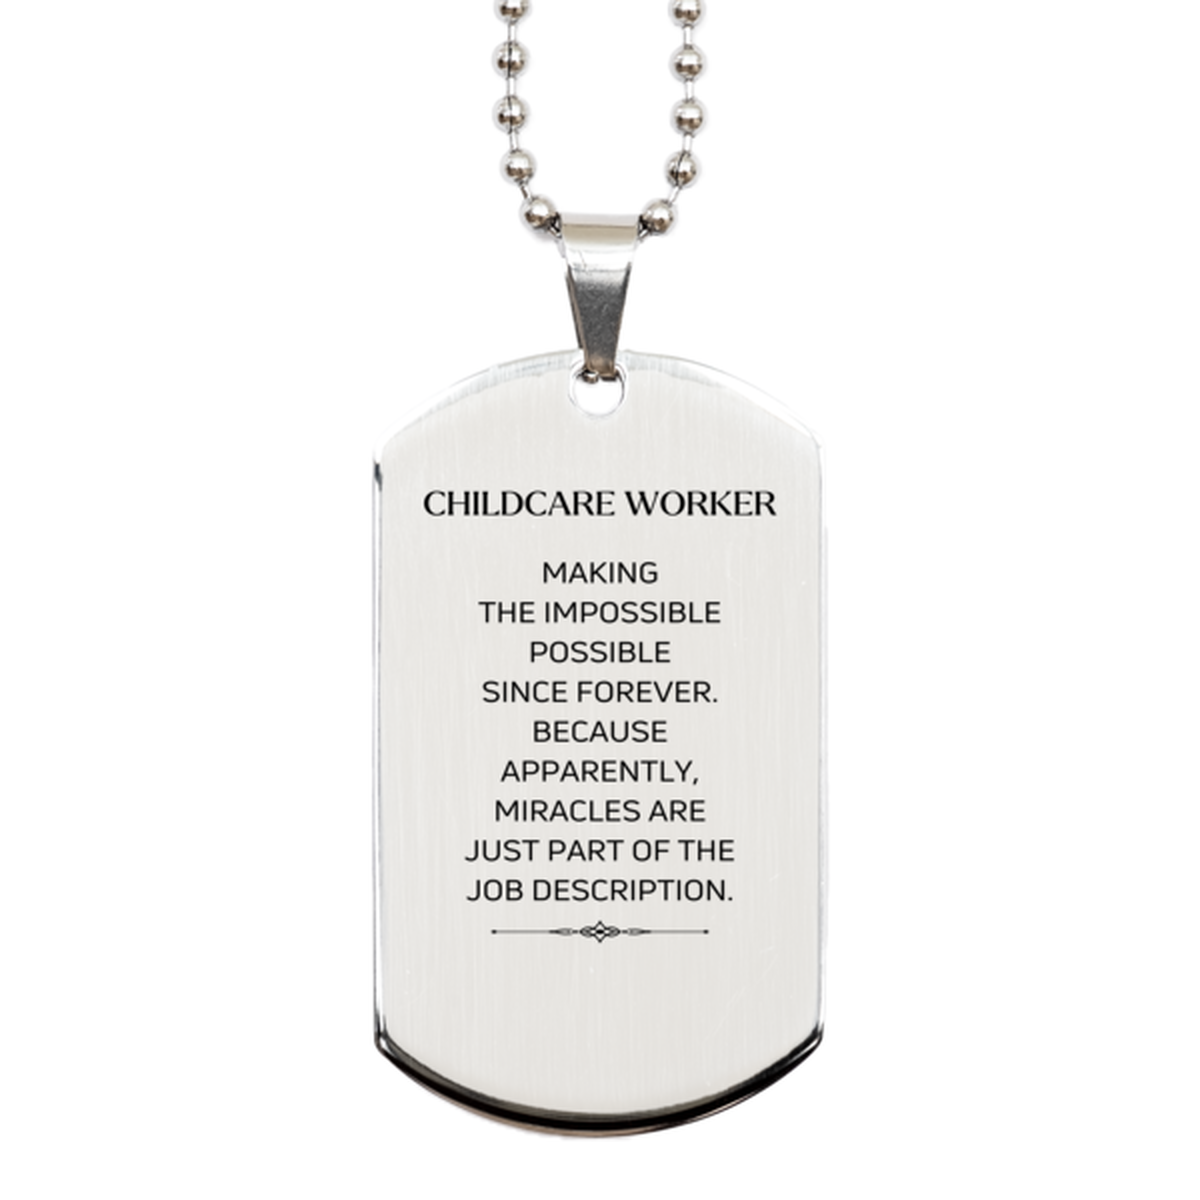 Funny Childcare Worker Gifts, Miracles are just part of the job description, Inspirational Birthday Silver Dog Tag For Childcare Worker, Men, Women, Coworkers, Friends, Boss